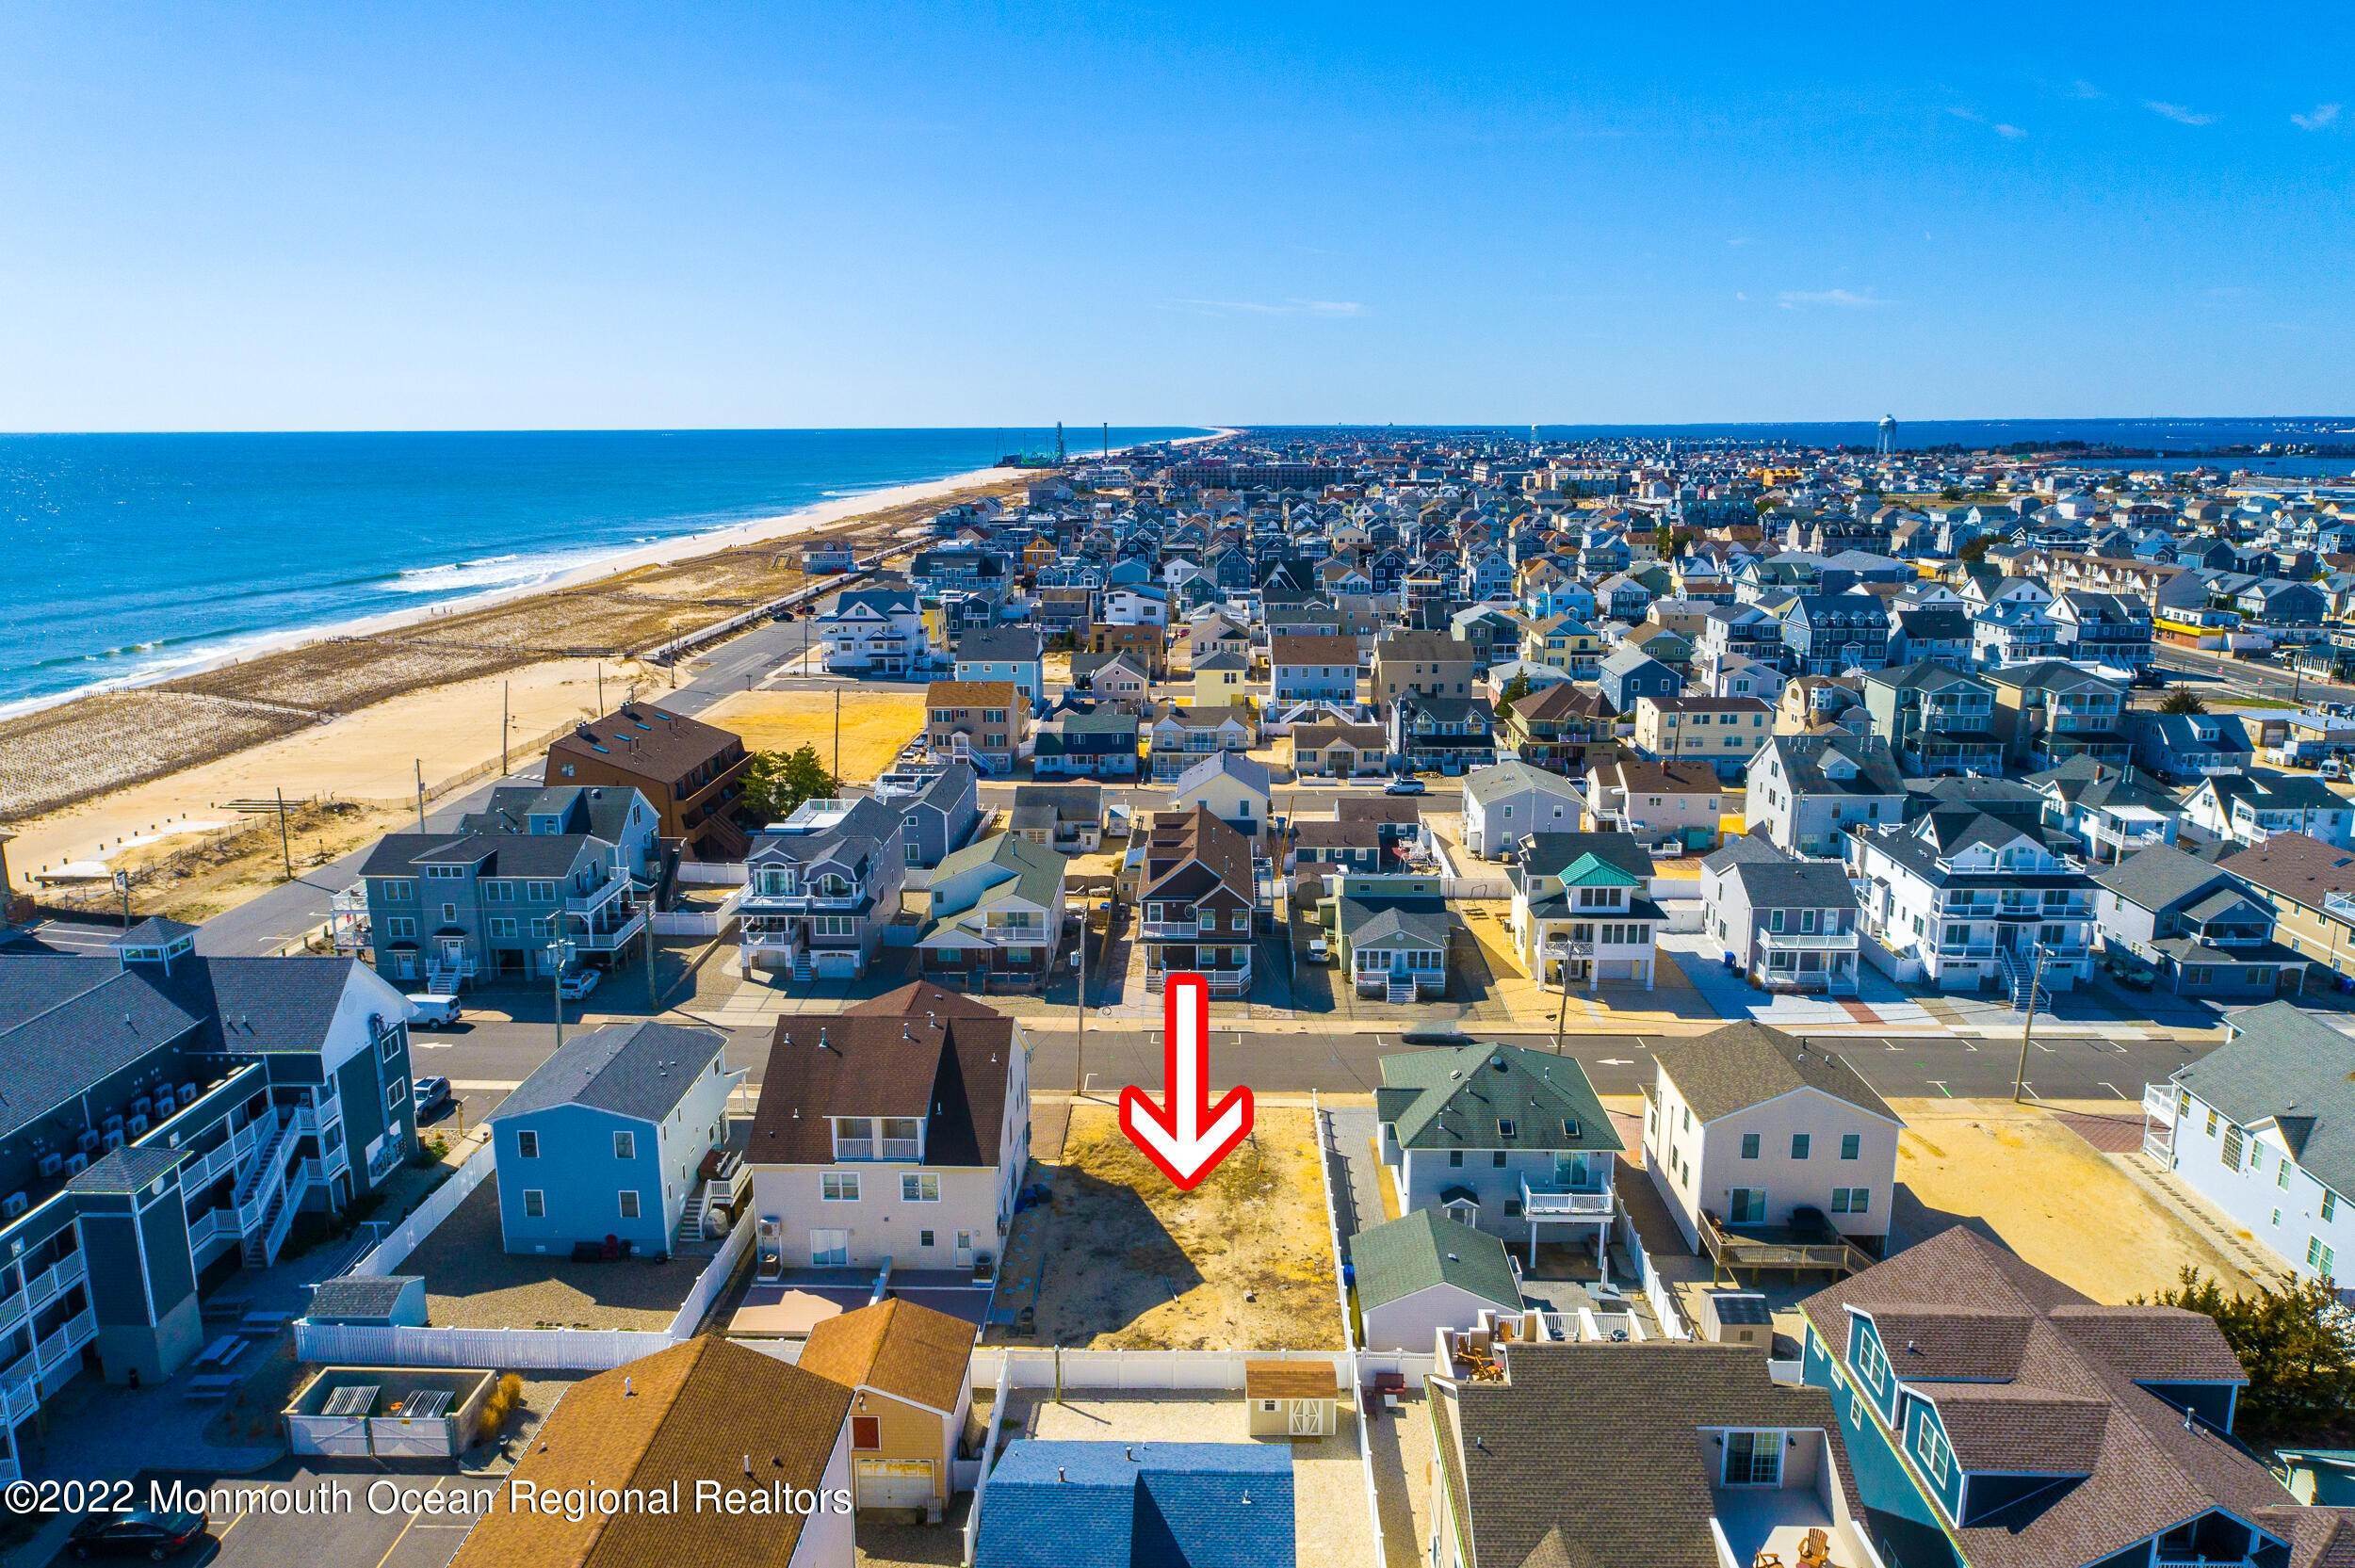 Property for Sale at 6 5th Avenue Ortley Beach, New Jersey 08751 United States